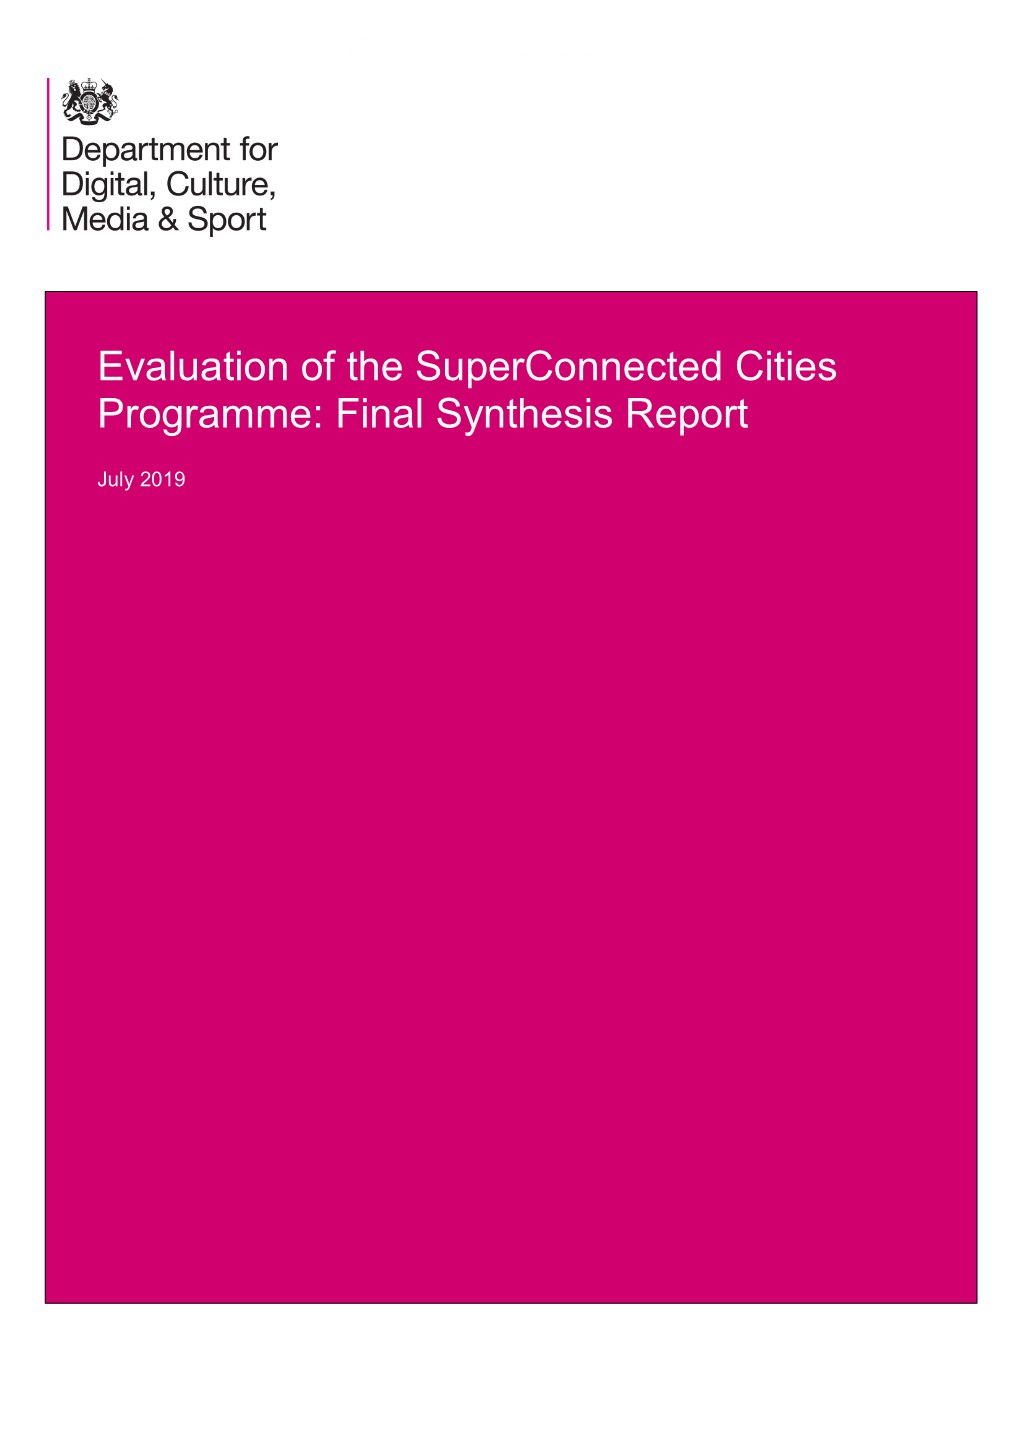 Evaluation of the Superconnected Cities Programme: Final Synthesis Report